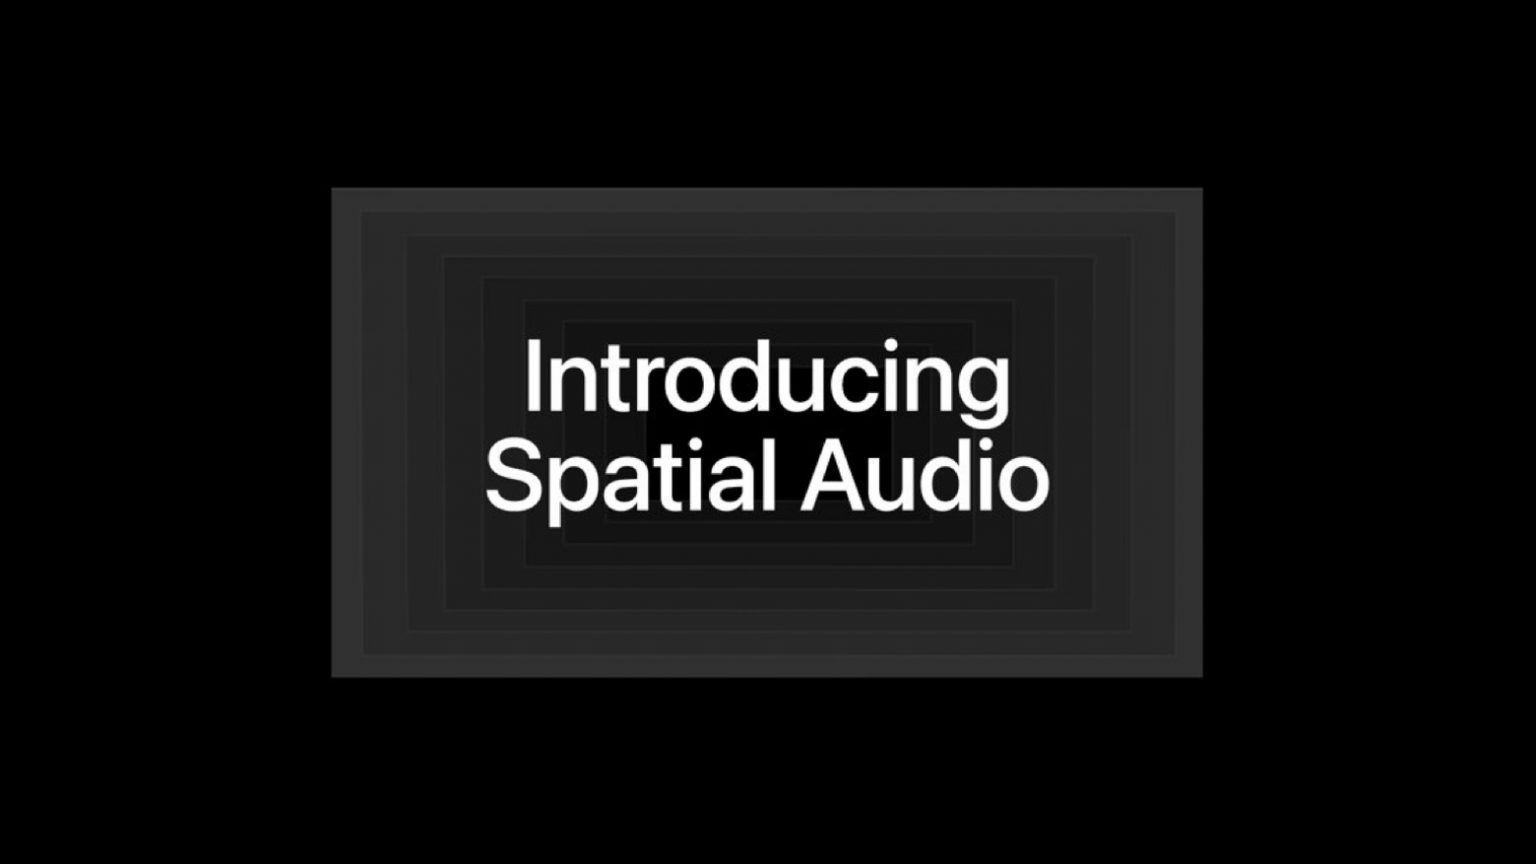 Apple Music Spatial Audio could debut on Monday